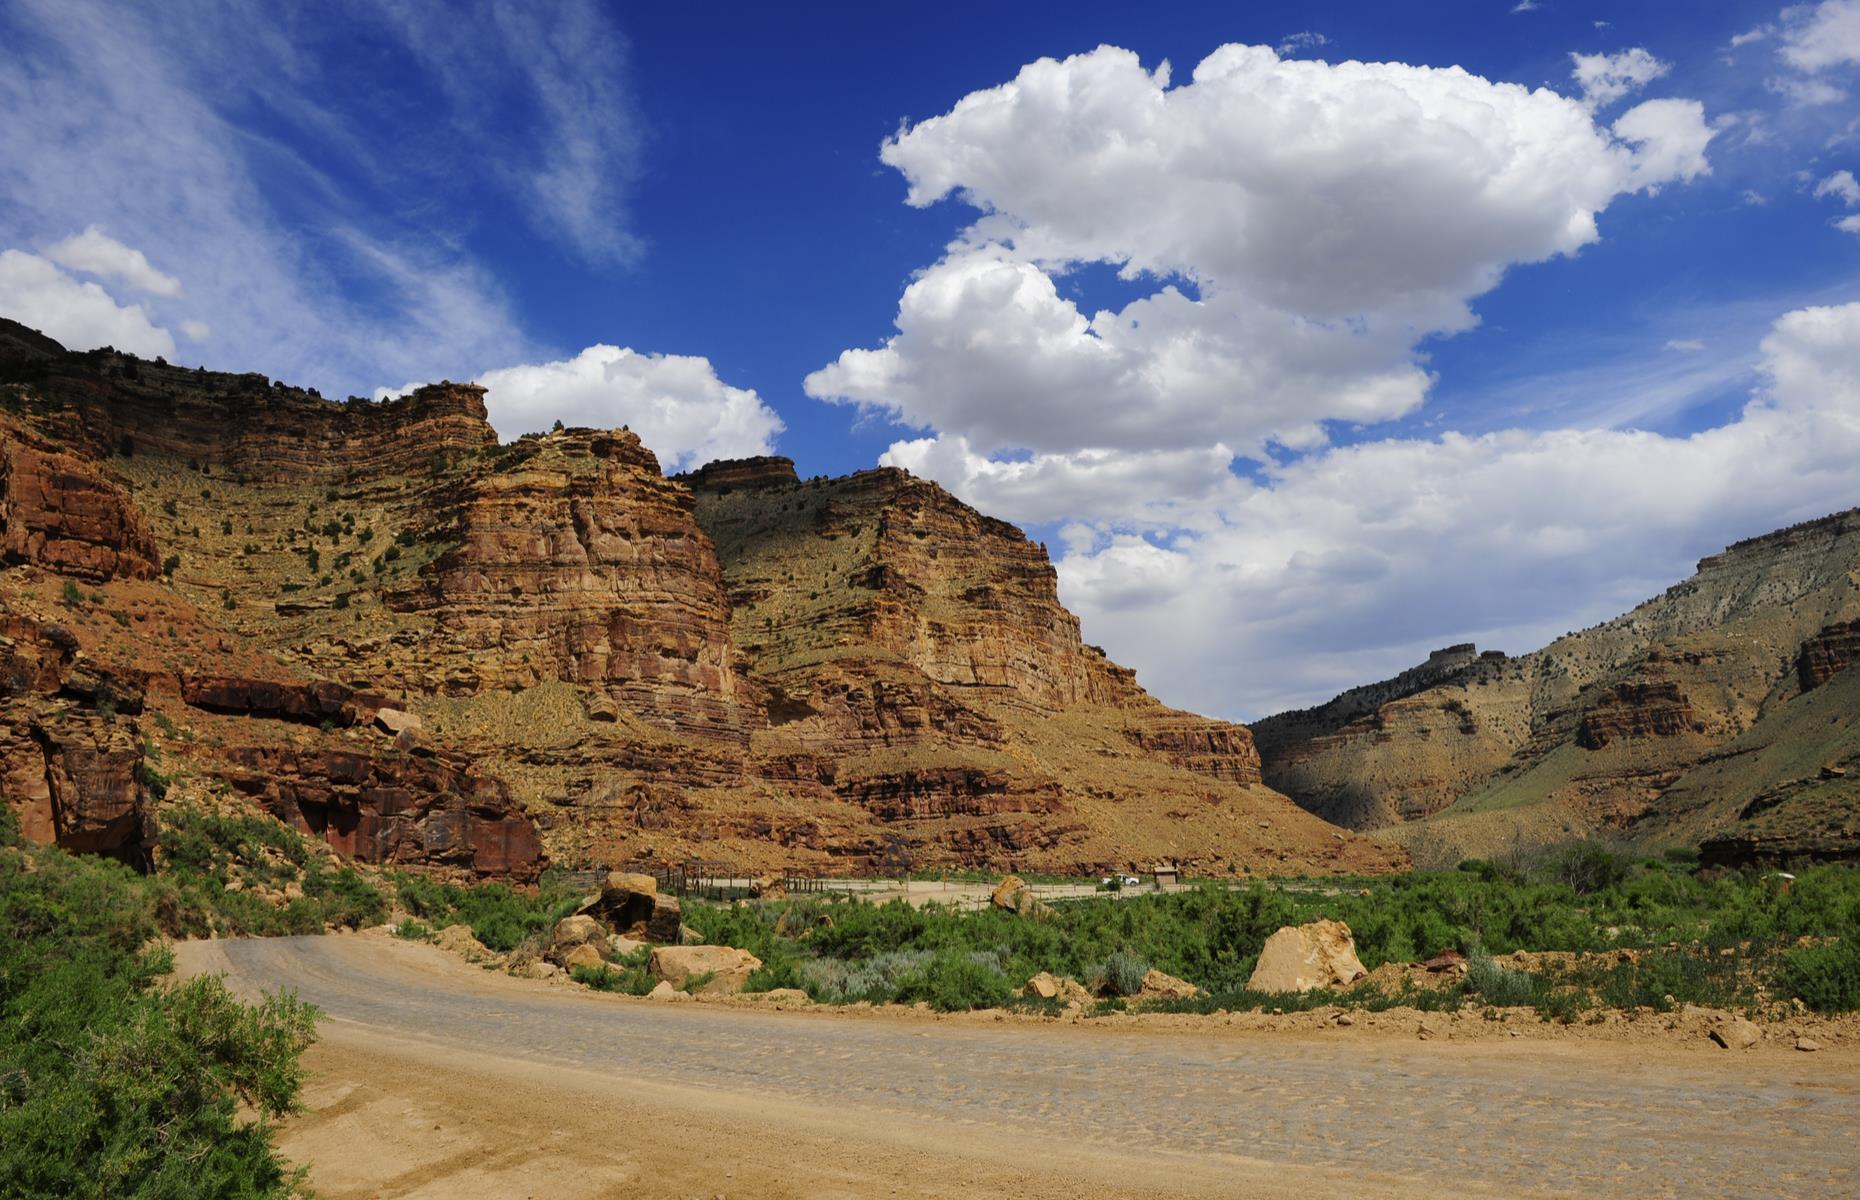 <p>Scale canyons, admire ancient rock art, follow old trails of Indigenous peoples and early settlers and discover historic mining towns on this <a href="https://www.visitutah.com/things-to-do/road-trips/undiscovered/natural-history-ancient-art">145-mile (233km) loop</a> in central Utah. Starting from the little town of Duchesne, southeast of Salt Lake City, this drive combines the Indian Canyon Scenic Byway with the remote Nine Mile Canyon Scenic Backway.</p>